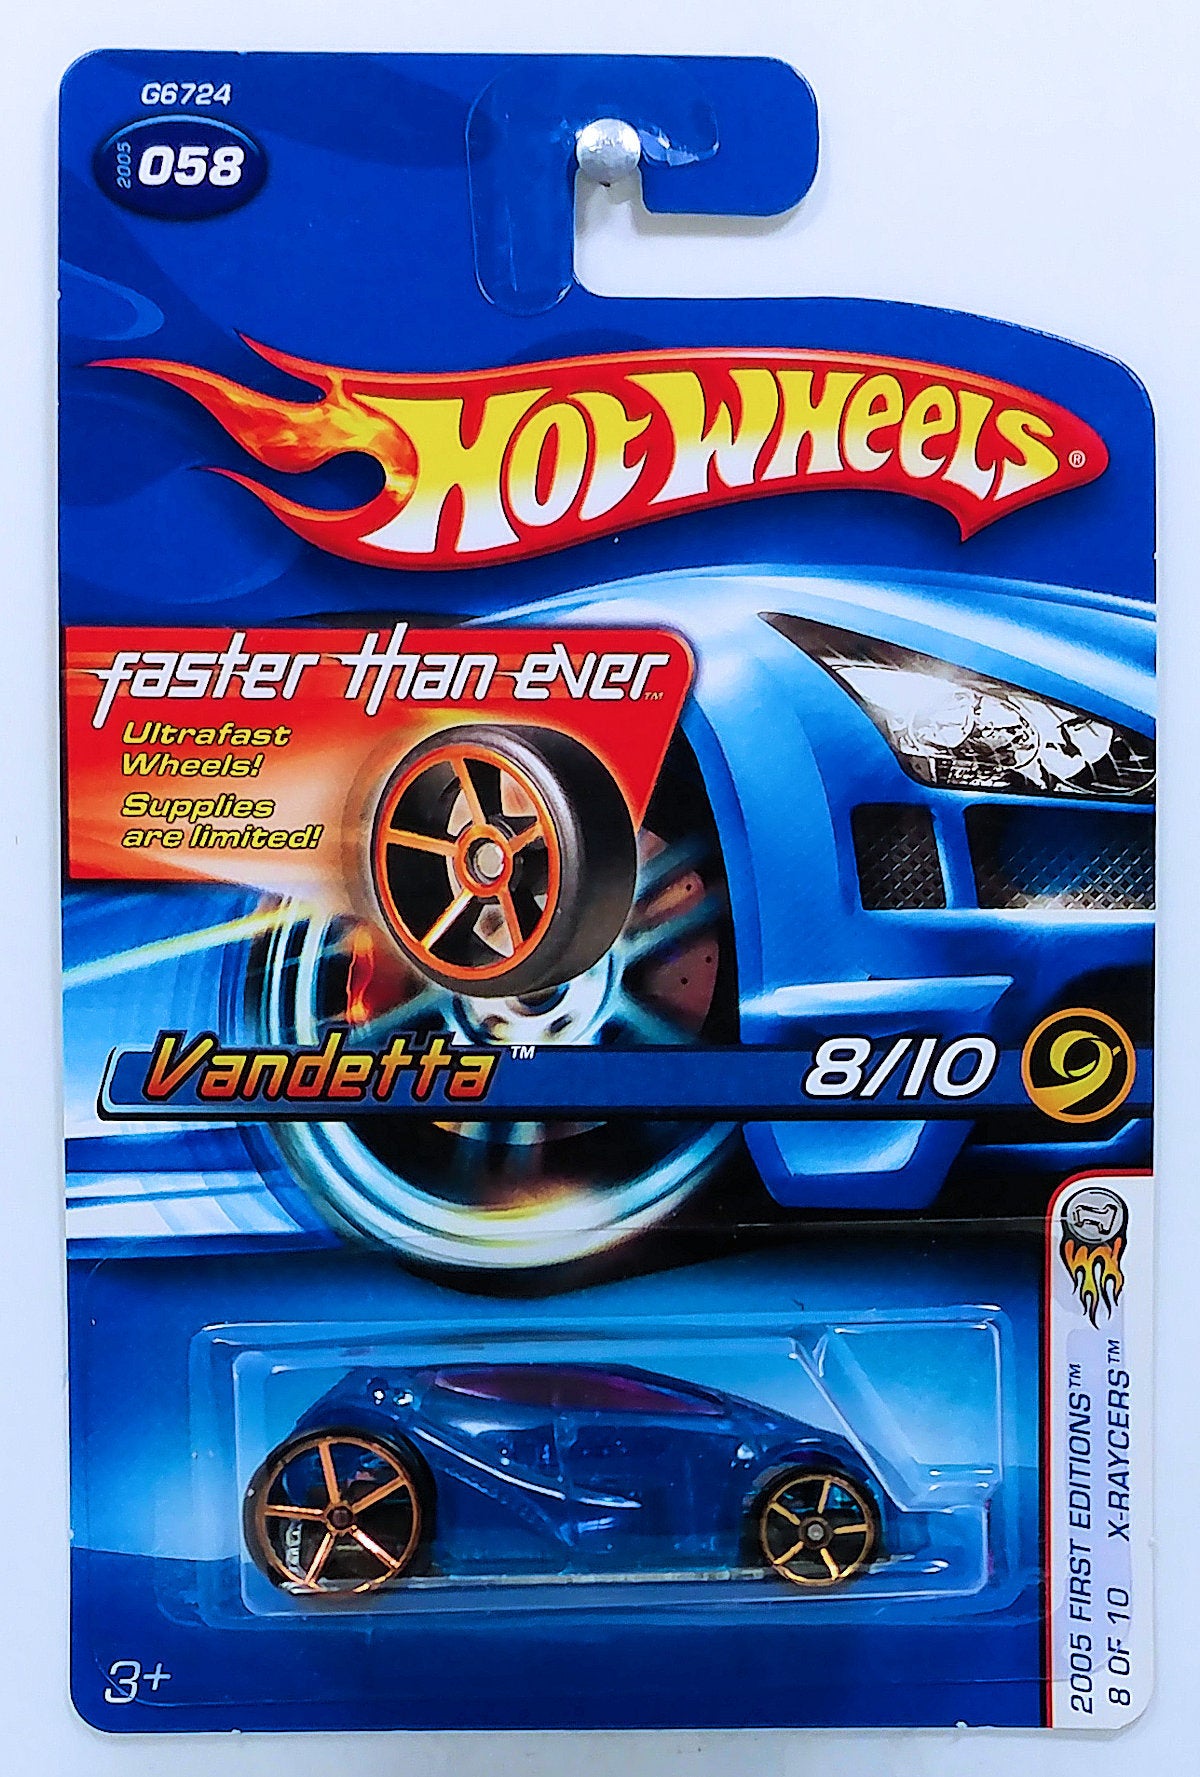 Hot Wheels 2005 - Collector # 058/183 - First Editions / X-Raycers 8/10 - Vandetta - Transparent Blue - Faster Than Ever